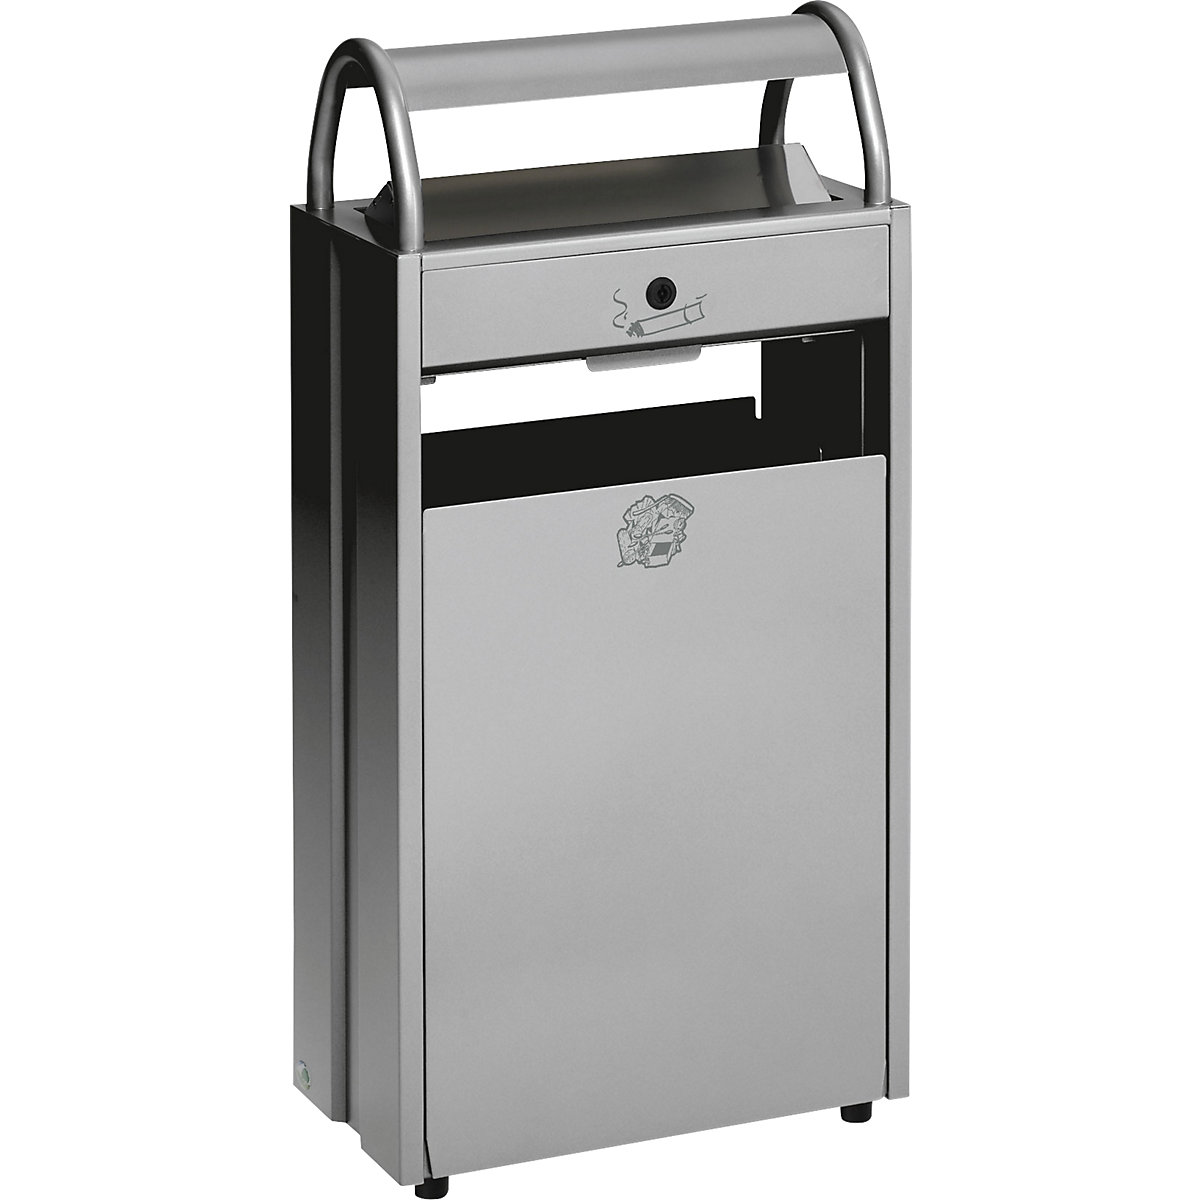 VAR – Waste collector with ashtray and rain protection hood, capacity 60 l, WxHxD 480 x 960 x 250 mm, silver